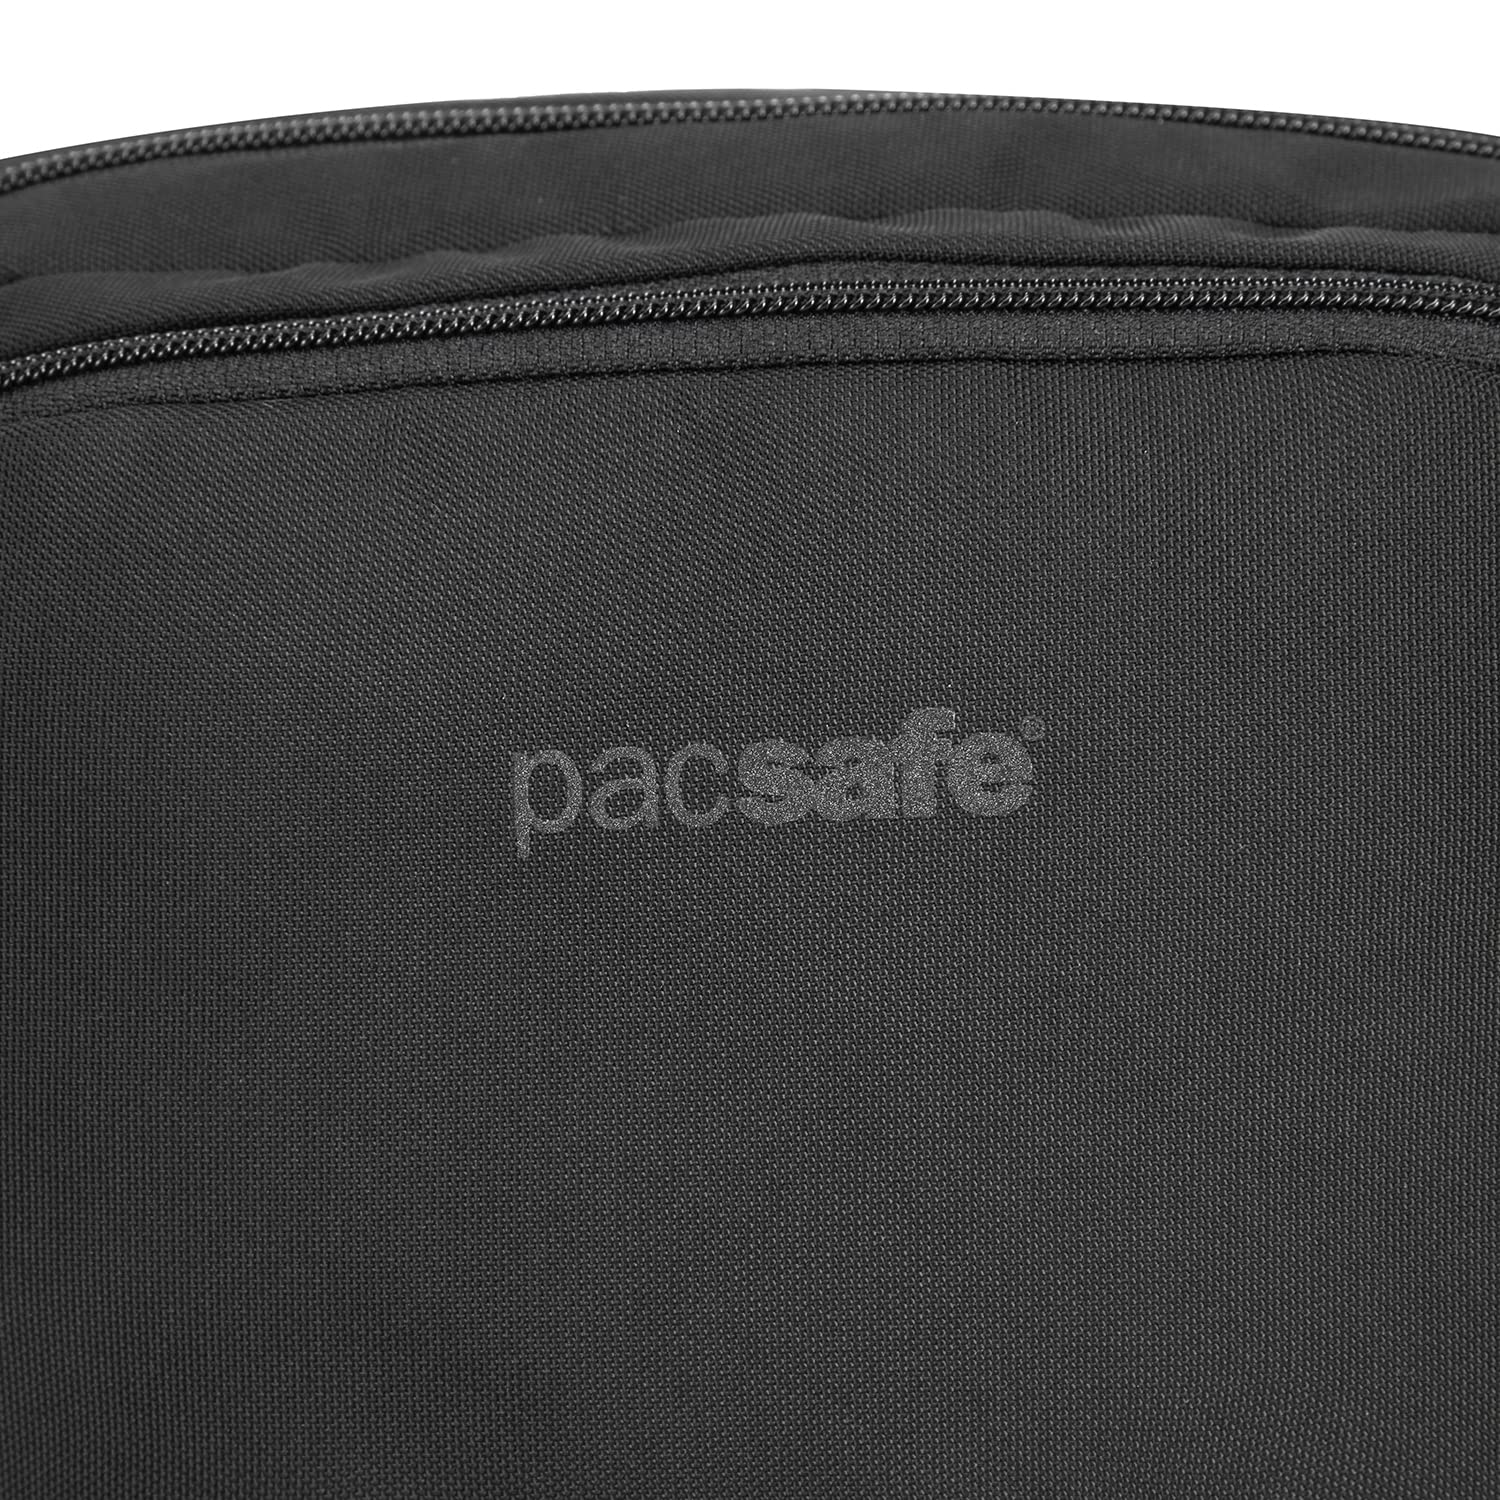 Pacsafe Vibe 100 4 Liter Anti Theft Fanny Pack-Fits 7 inch Tablet Waist, Black